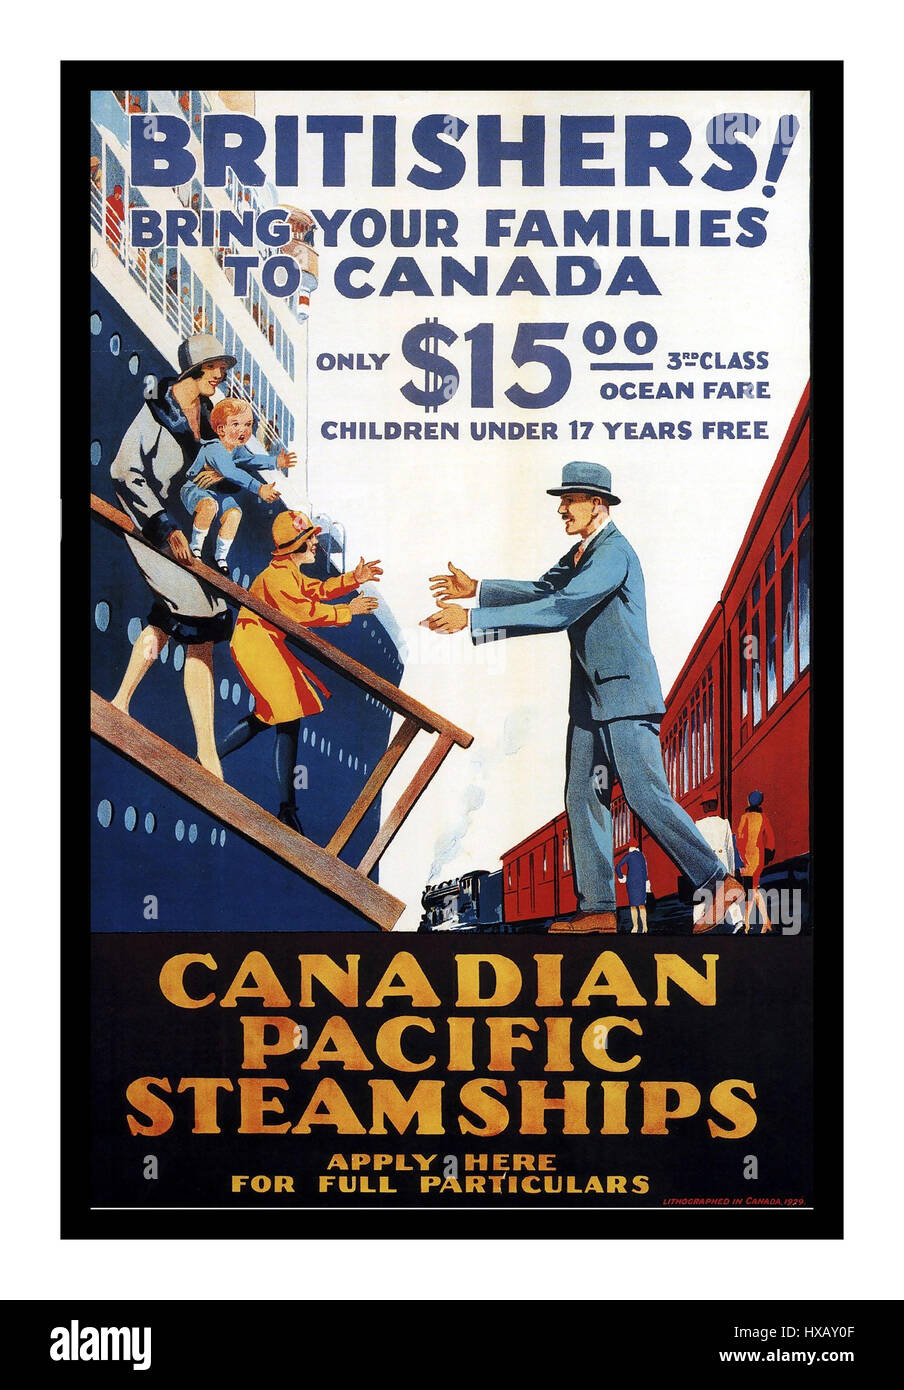 Britishers..! Bring Your Families to Canada - Vintage Travel Poster for Canadian Pacific Steamships,1920's Stock Photo